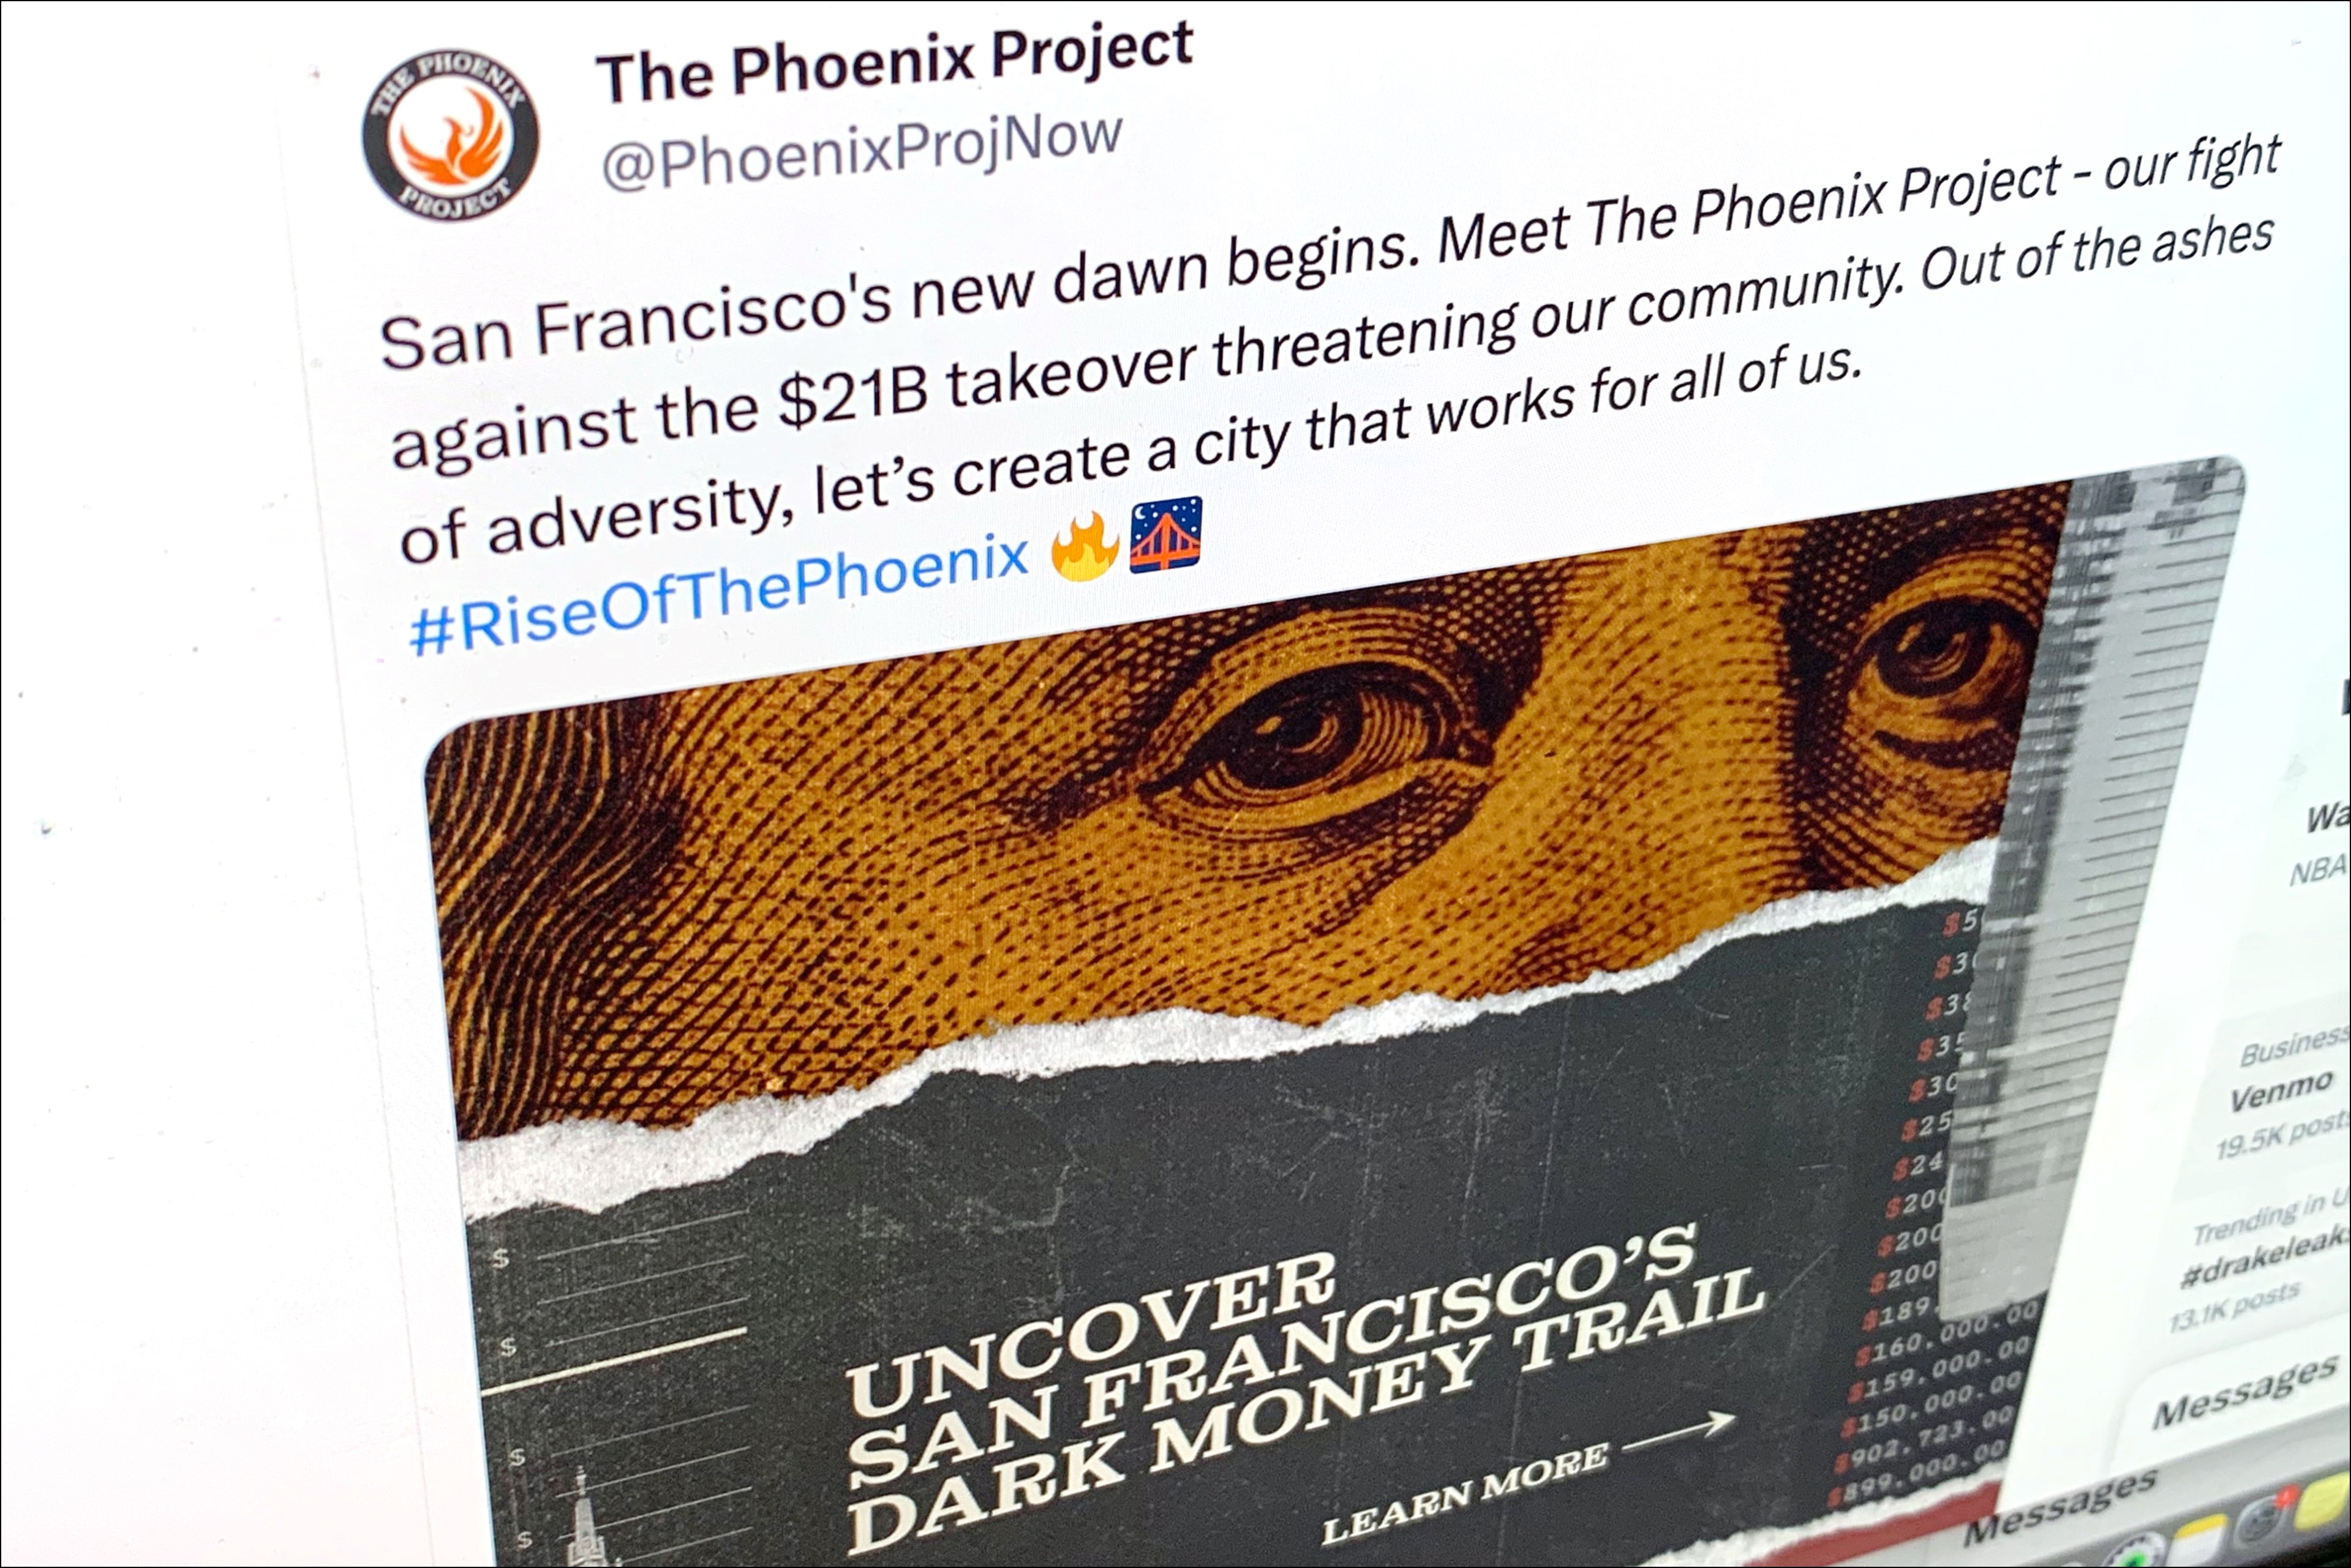 A screenshot of Twitter showing an account called the Phoenix Project which purports to uncover dark-money political groups.